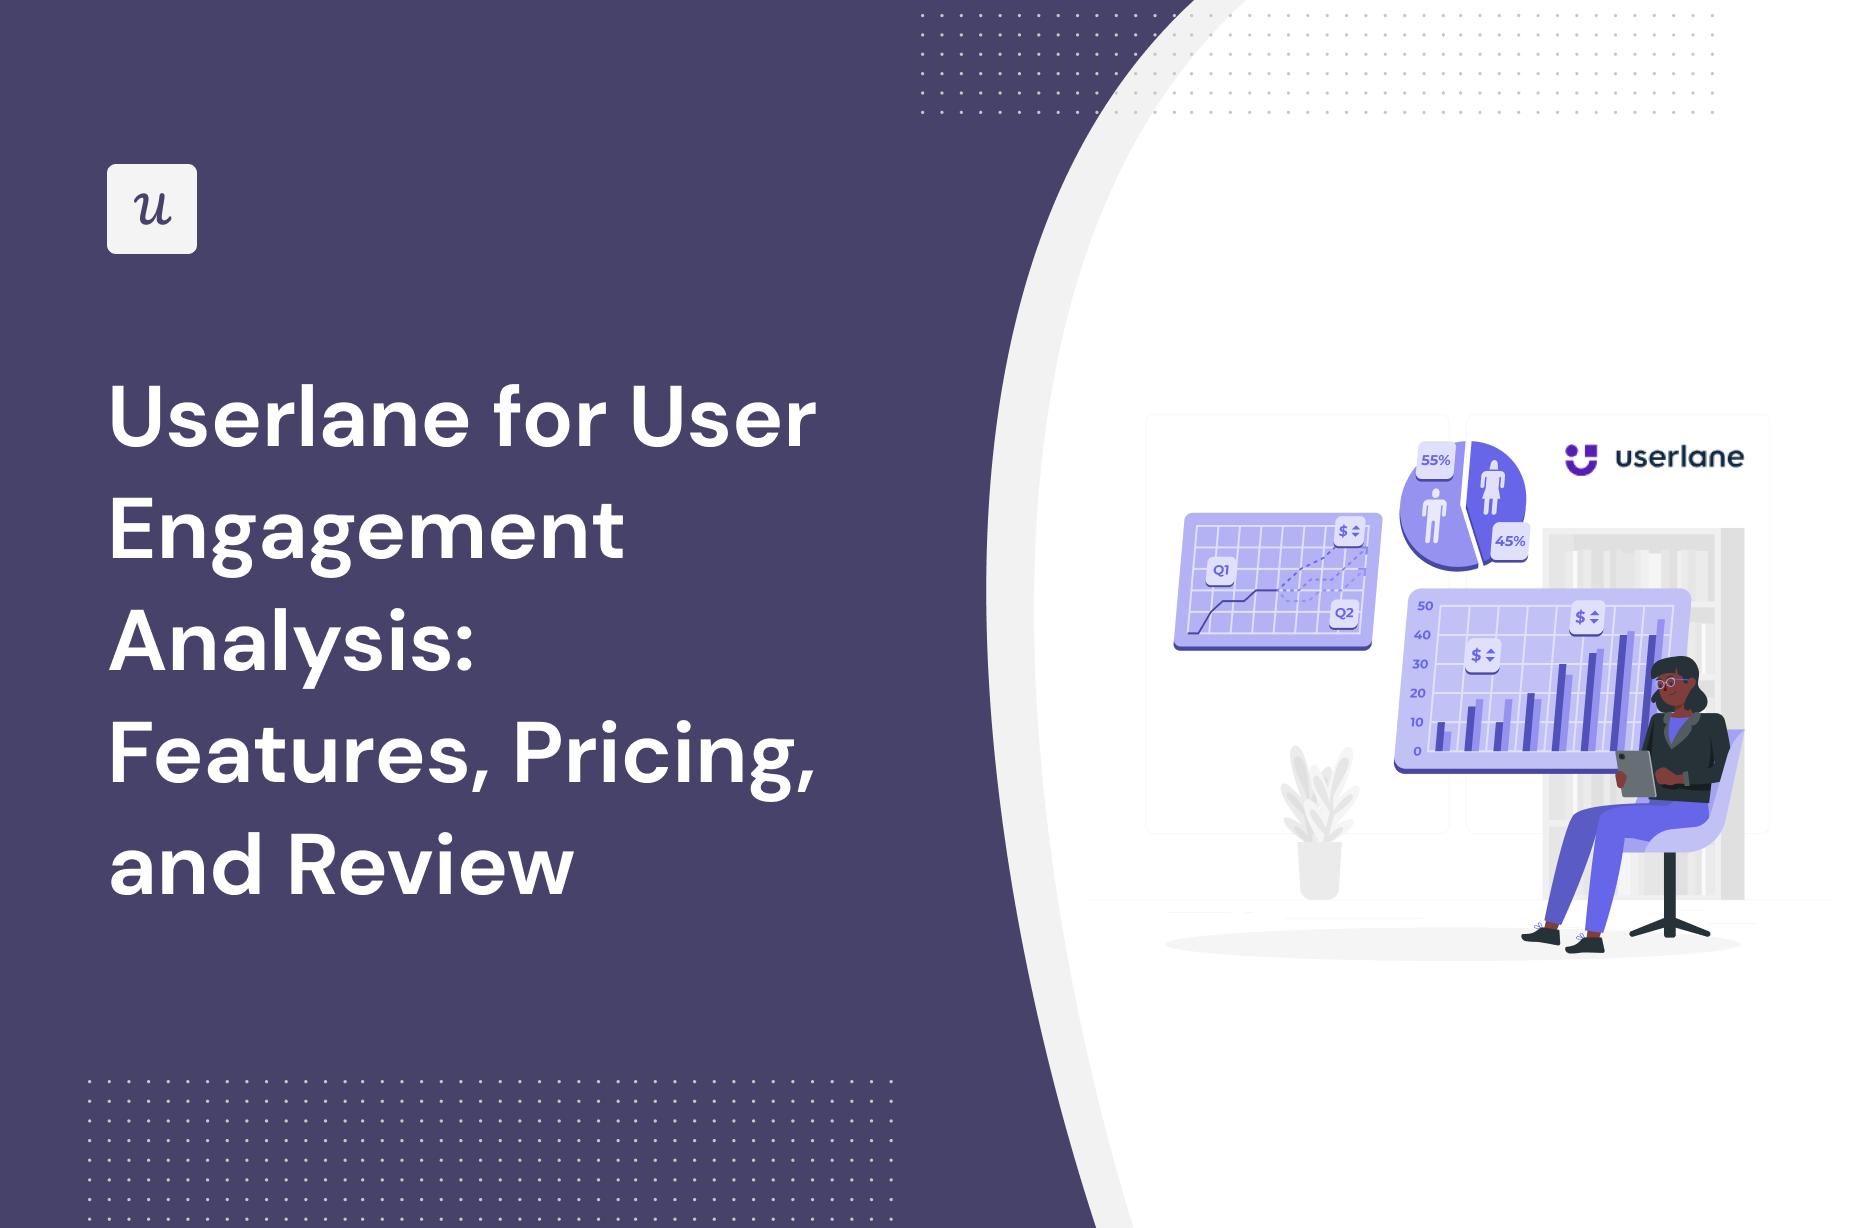 Userlane for User Engagement Analysis: Features, Pricing, and Review